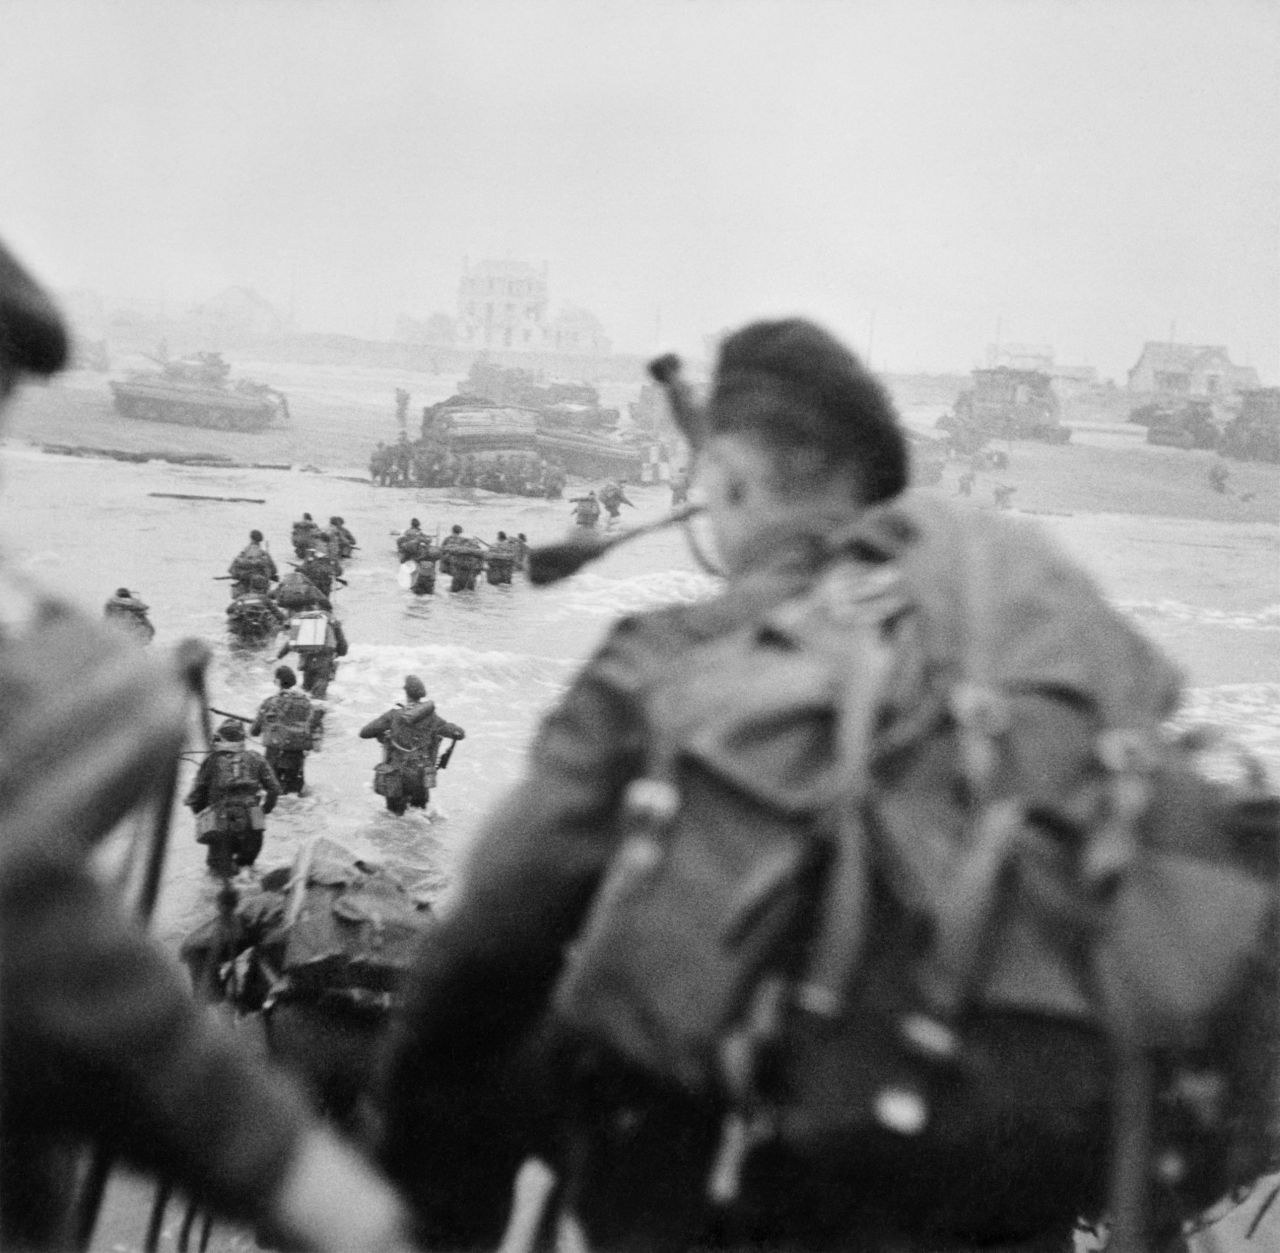 Commandos of 1st Special Service Brigade land on 'Queen Red' Beach, Sword sector, at around 8.40am on 6 June 1944. 